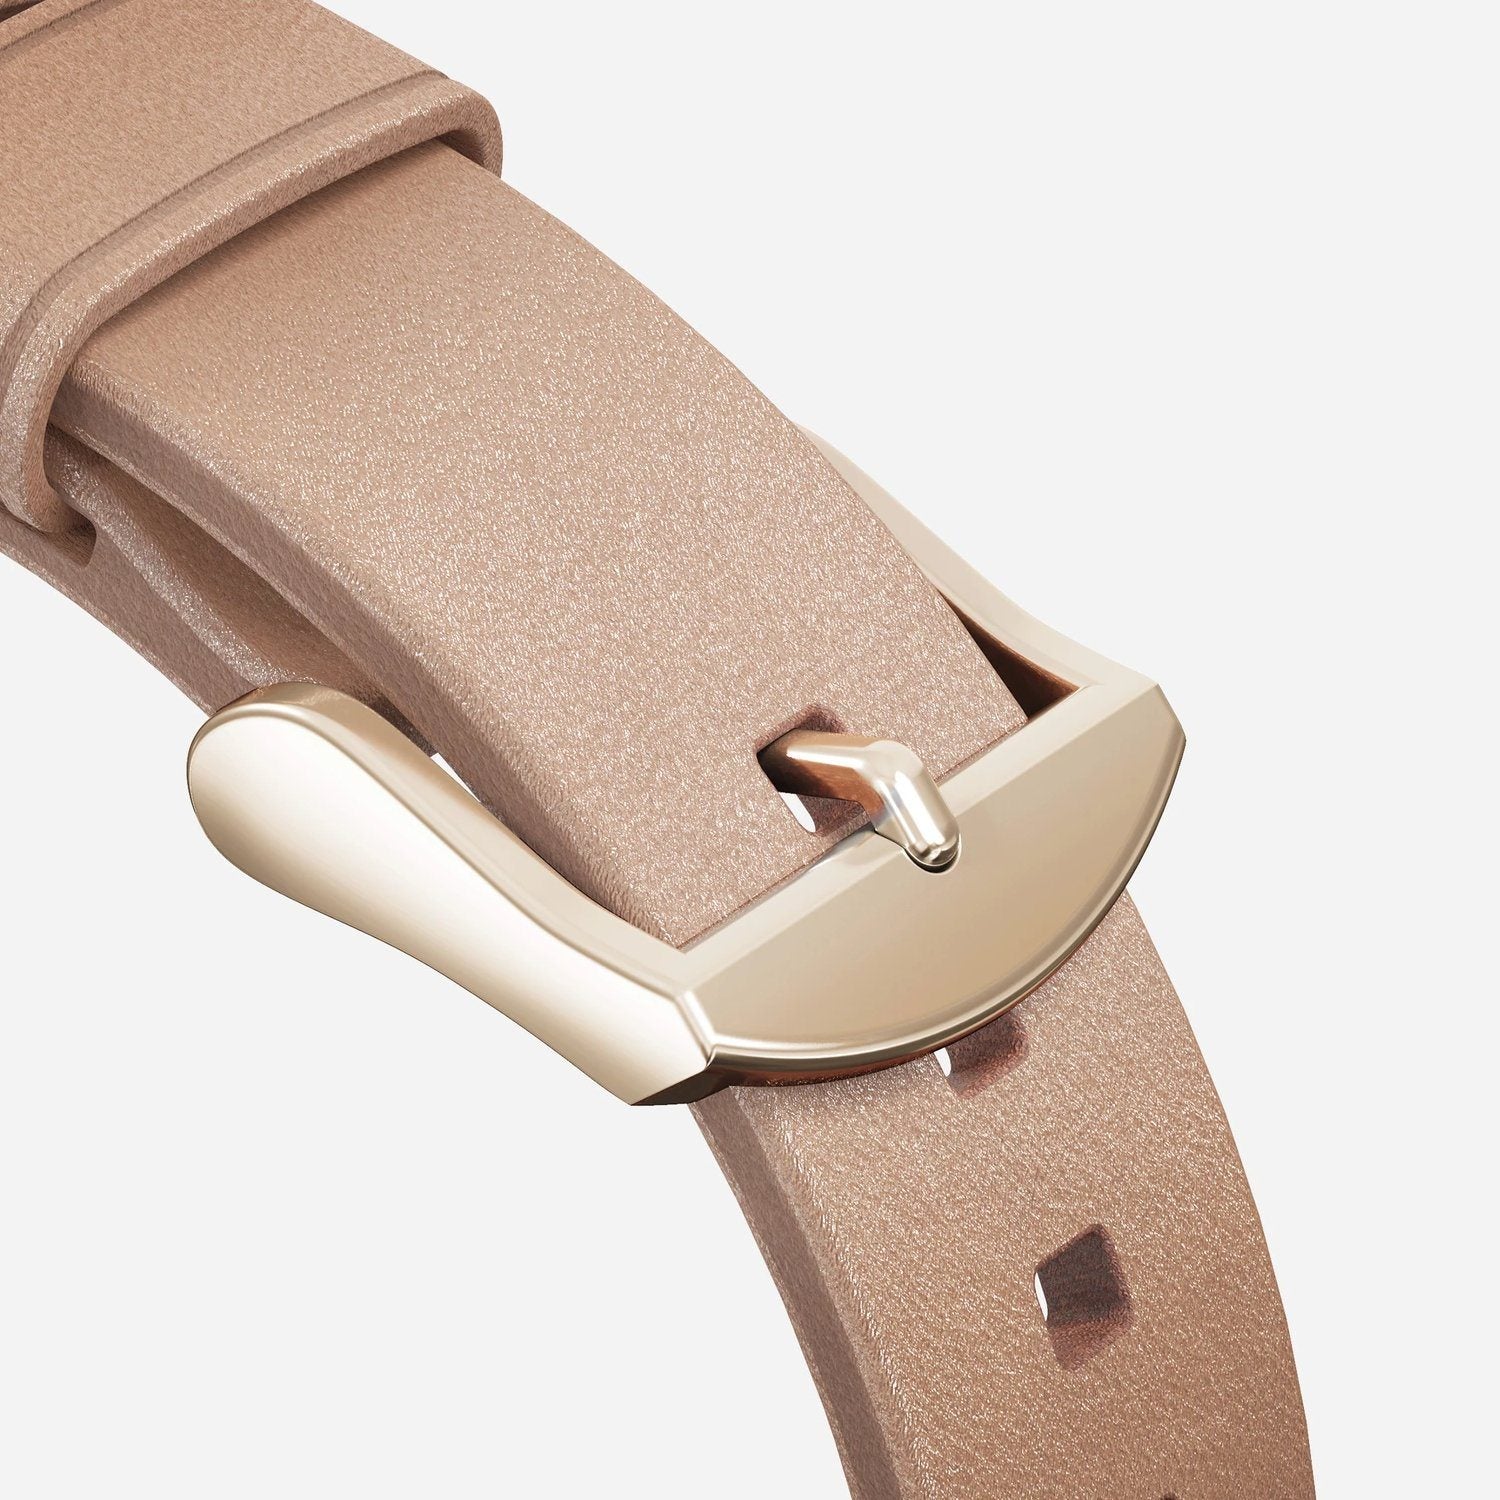 NOMAD Modern Strap Natural Horween Leather for Apple Watch 40mm/38mm, Gold Hardware Apple Watch Strap NOMAD 